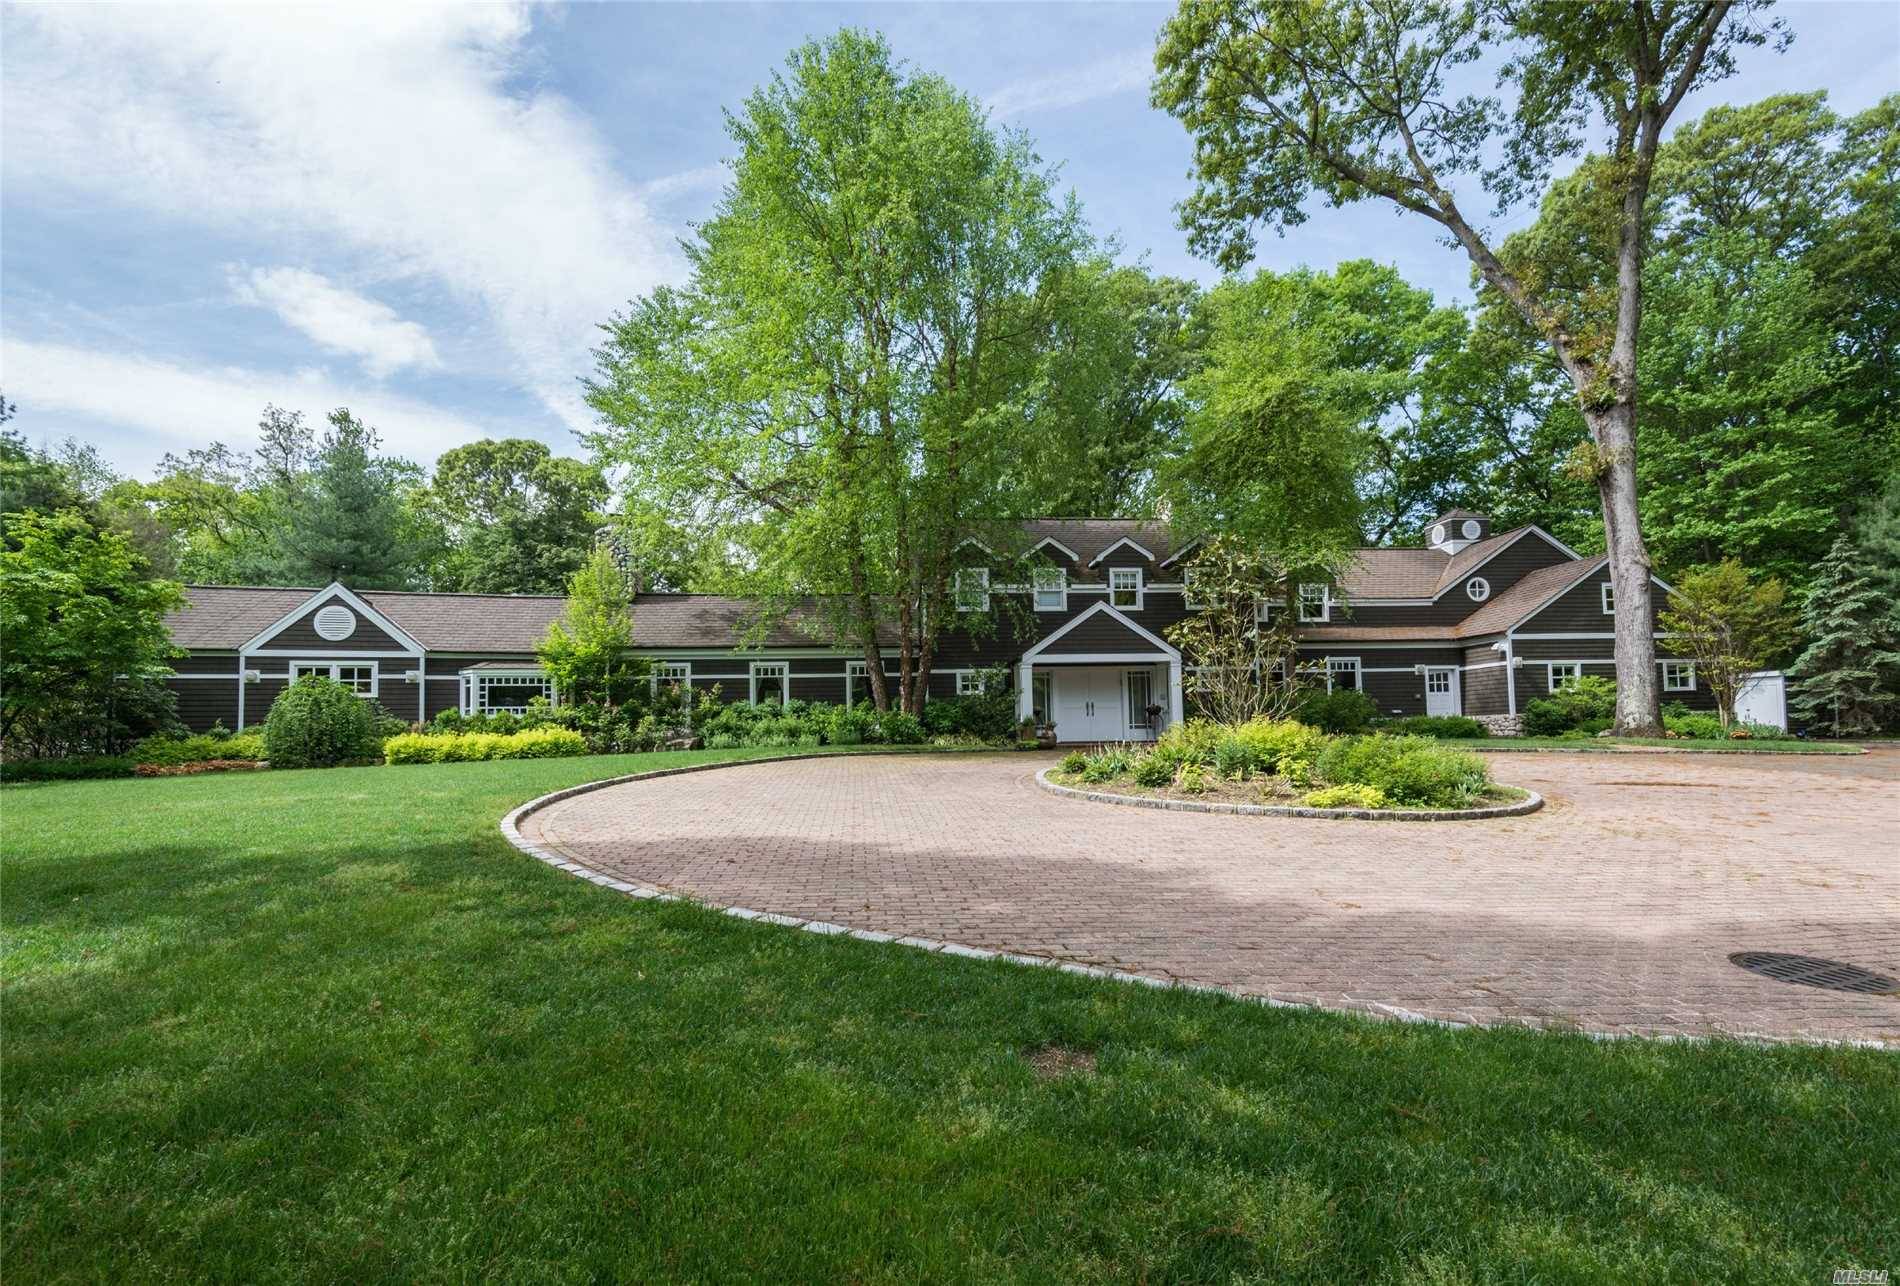 Elegant Farm Home And Estate With Updated High End Decorator Finishes.